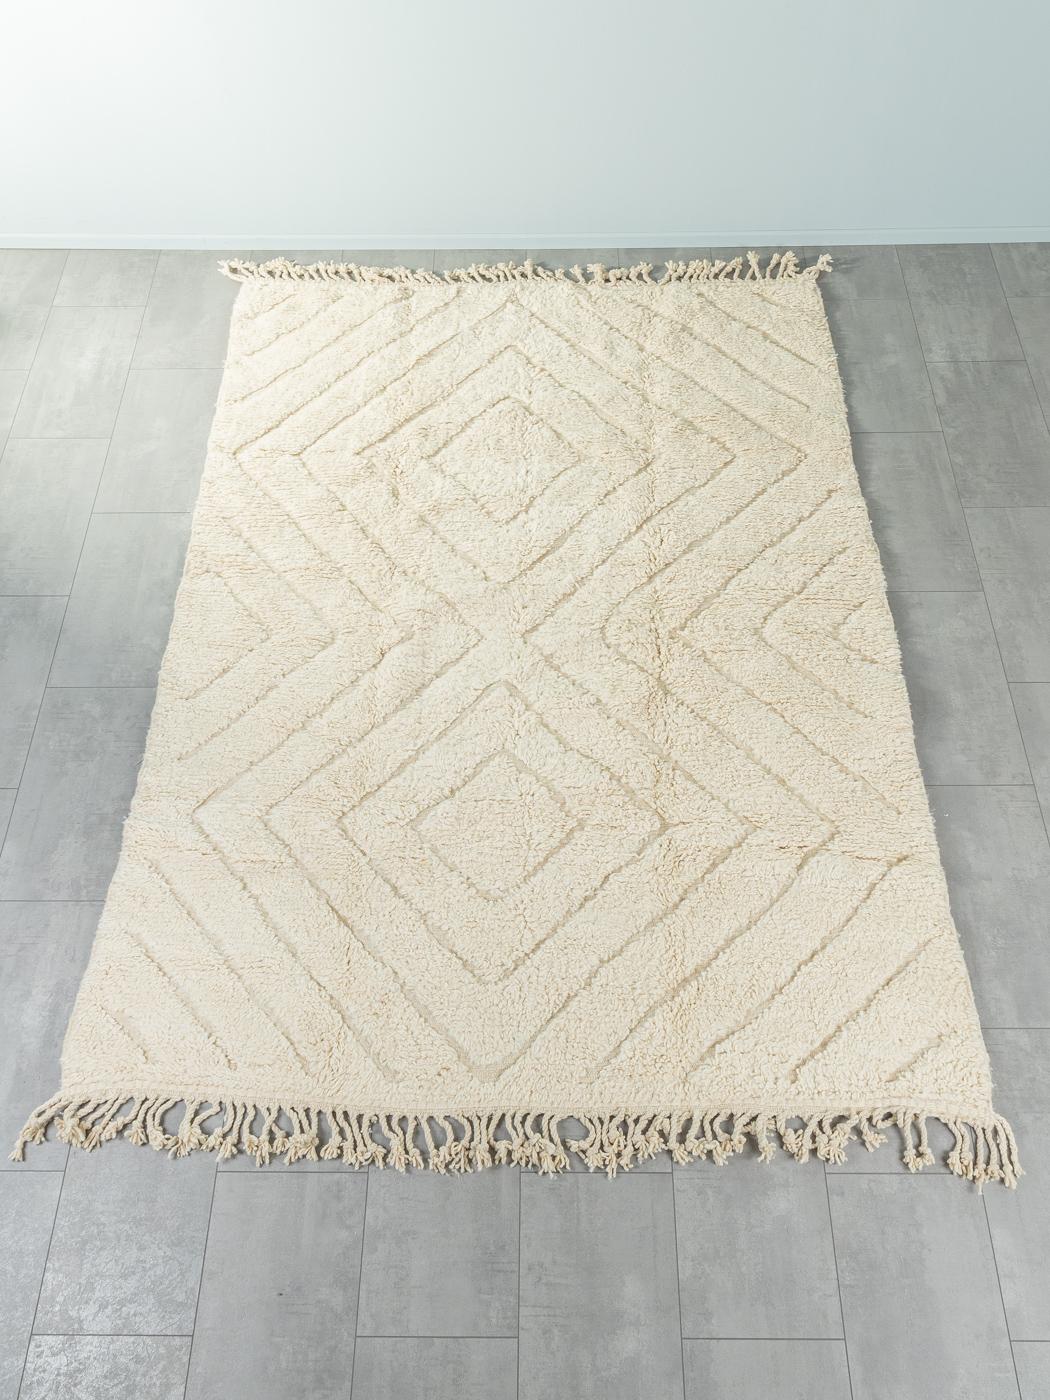 Decent square is a contemporary 100% wool rug – thick and soft, comfortable underfoot. Our Berber rugs are handwoven and handknotted by Amazigh women in the Atlas Mountains. These communities have been crafting rugs for thousands of years. One knot